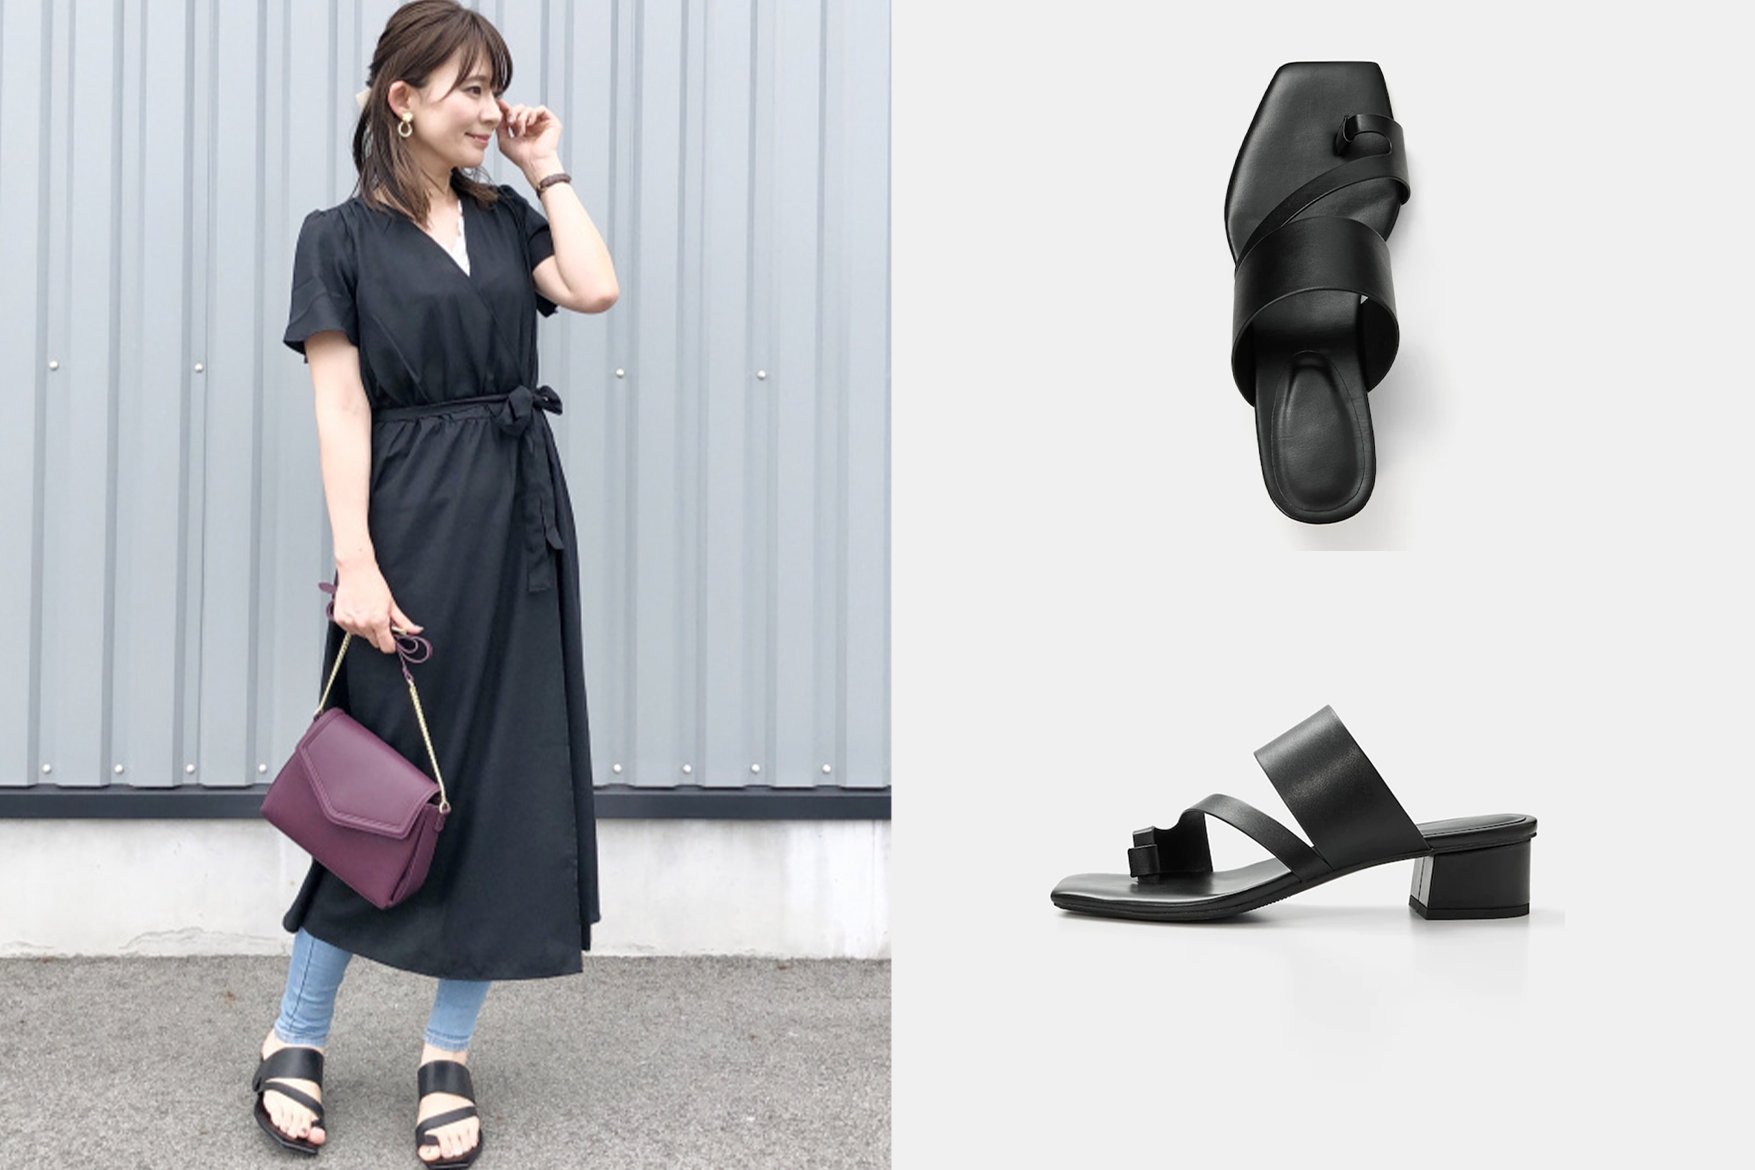 A-minimal-low-heel-mules-from-GU-capture-the-hearts-of-Japan-girls-01